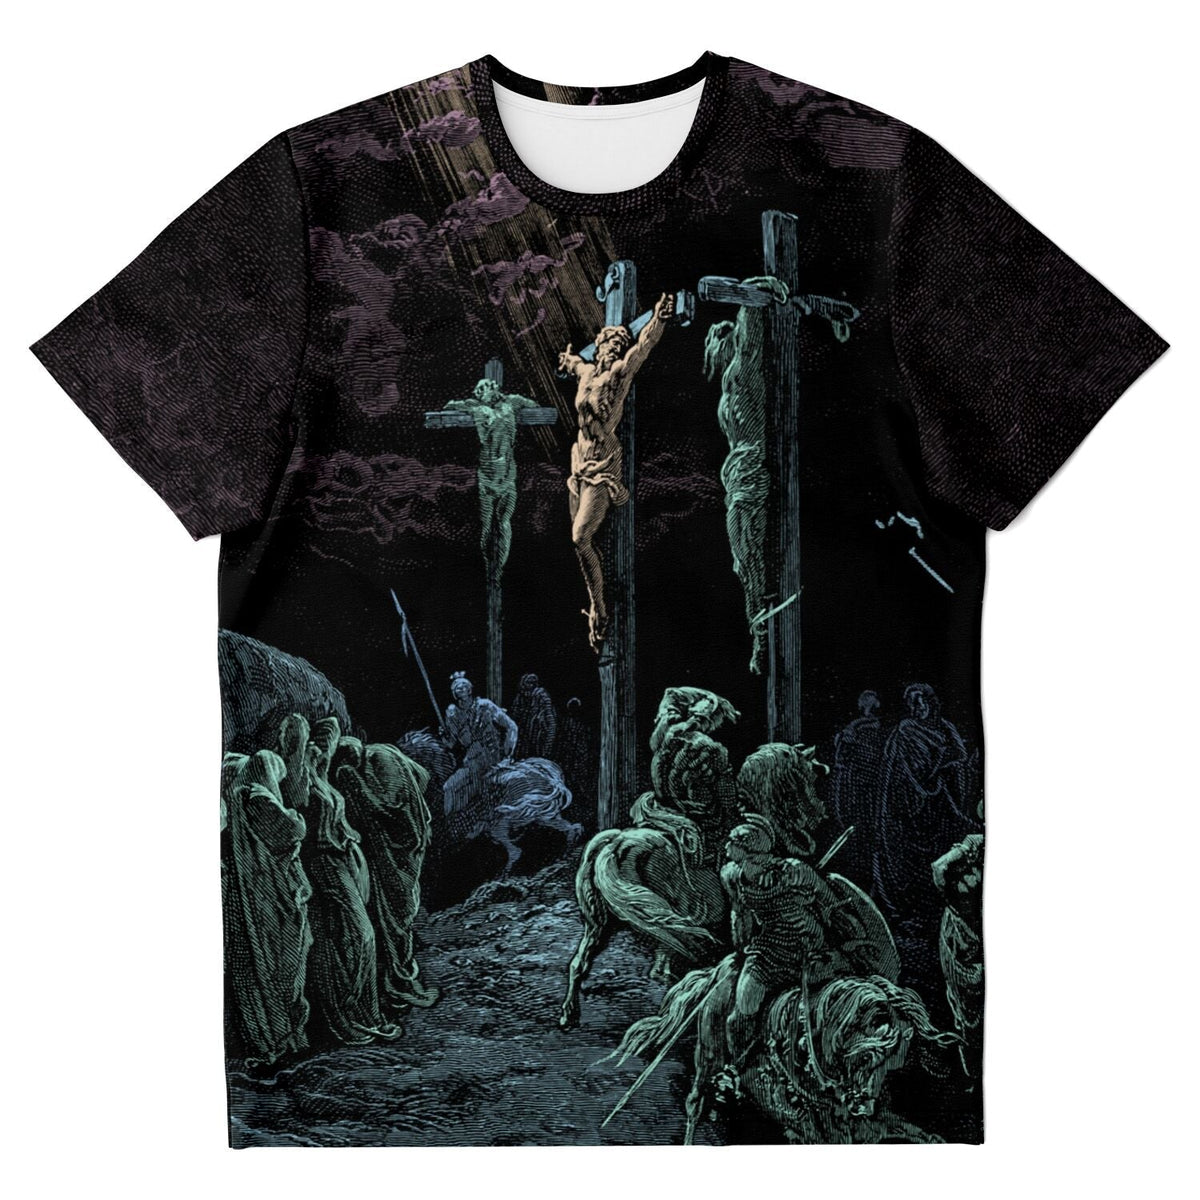 T-shirt XS The Crucifixion of Christ by Gustave Dore, Paradise Lost, Dante, Surreal Spiritual Graphic Art T-Shirt